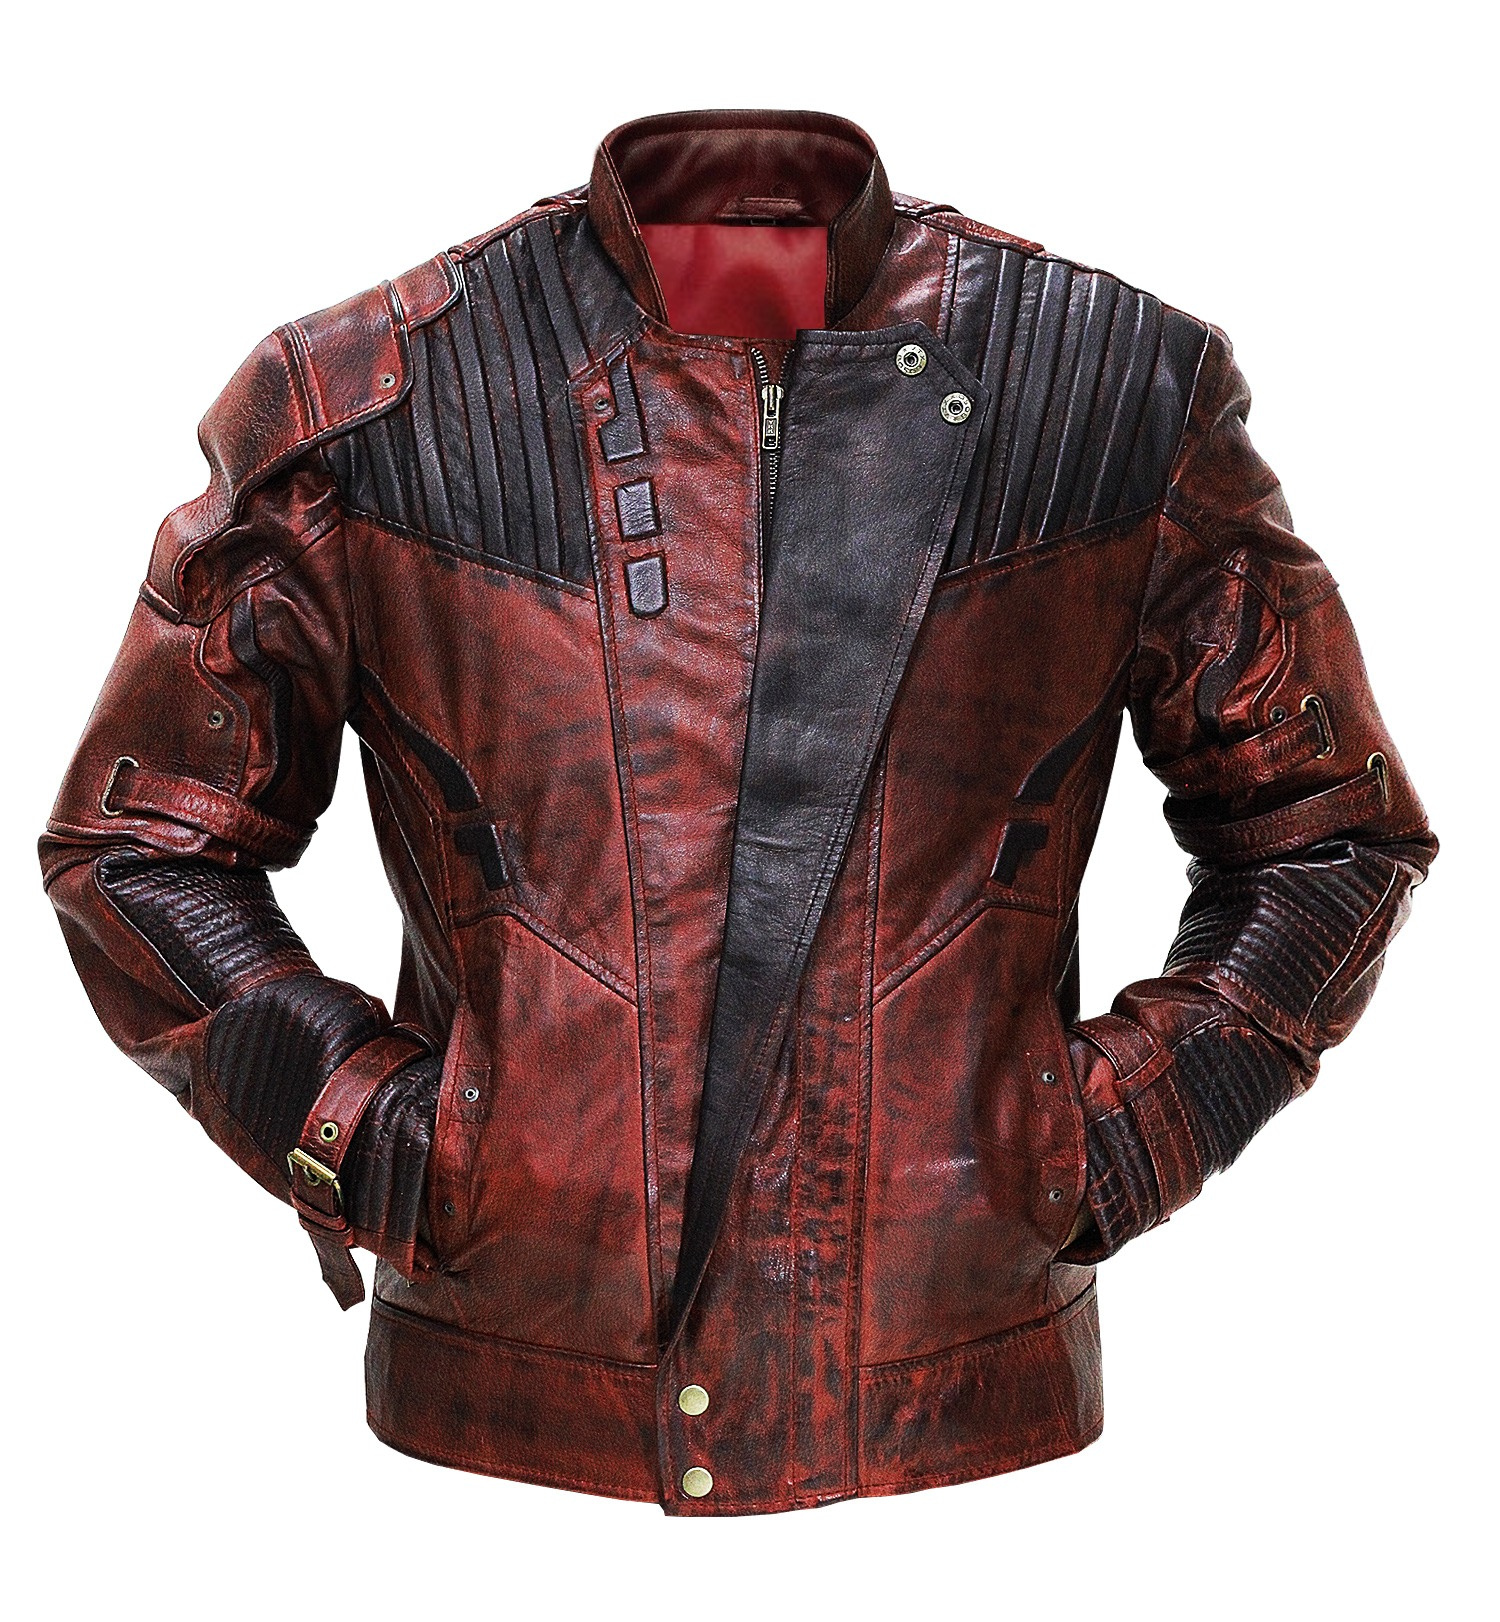 Guardians of the Galaxy 2 Starlord Leather Jacket